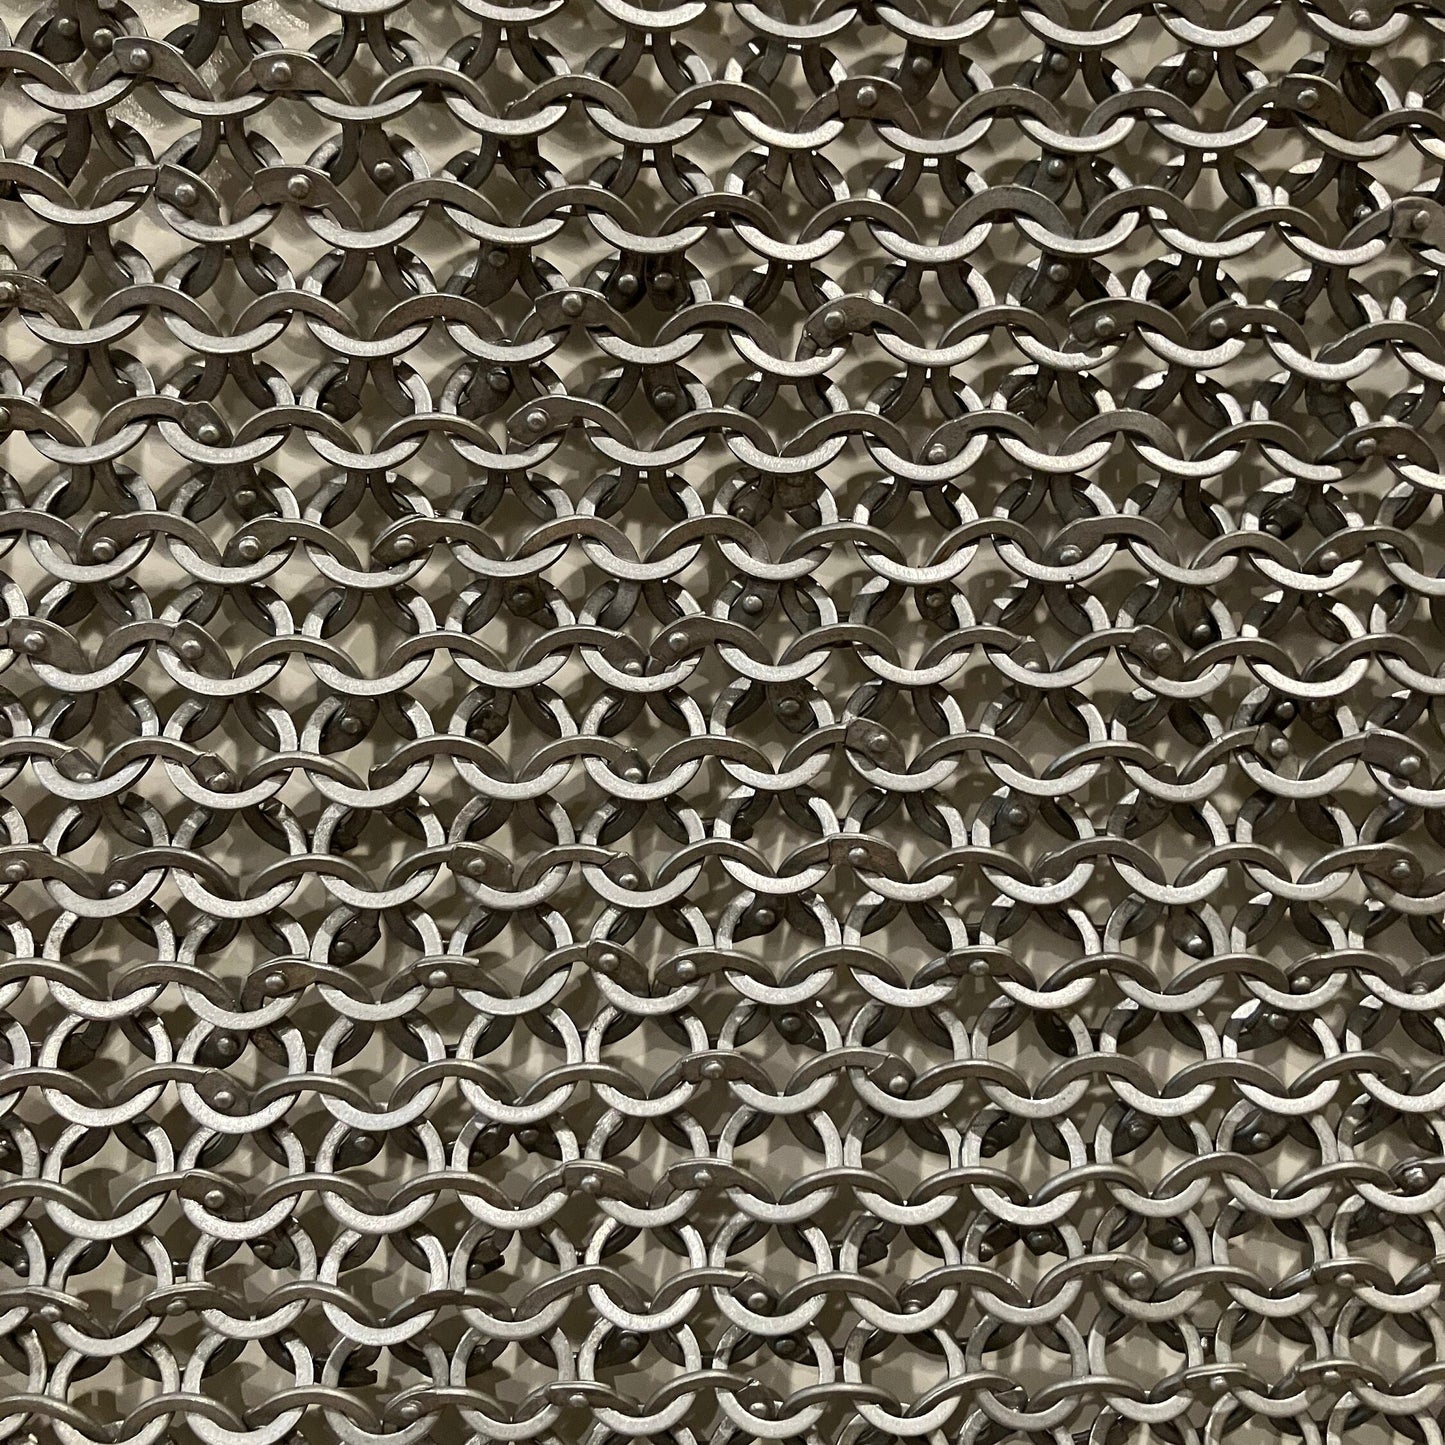 Antiqued Aluminum Riveted Chainmaille Fabric Squares for Armor and Cosplay